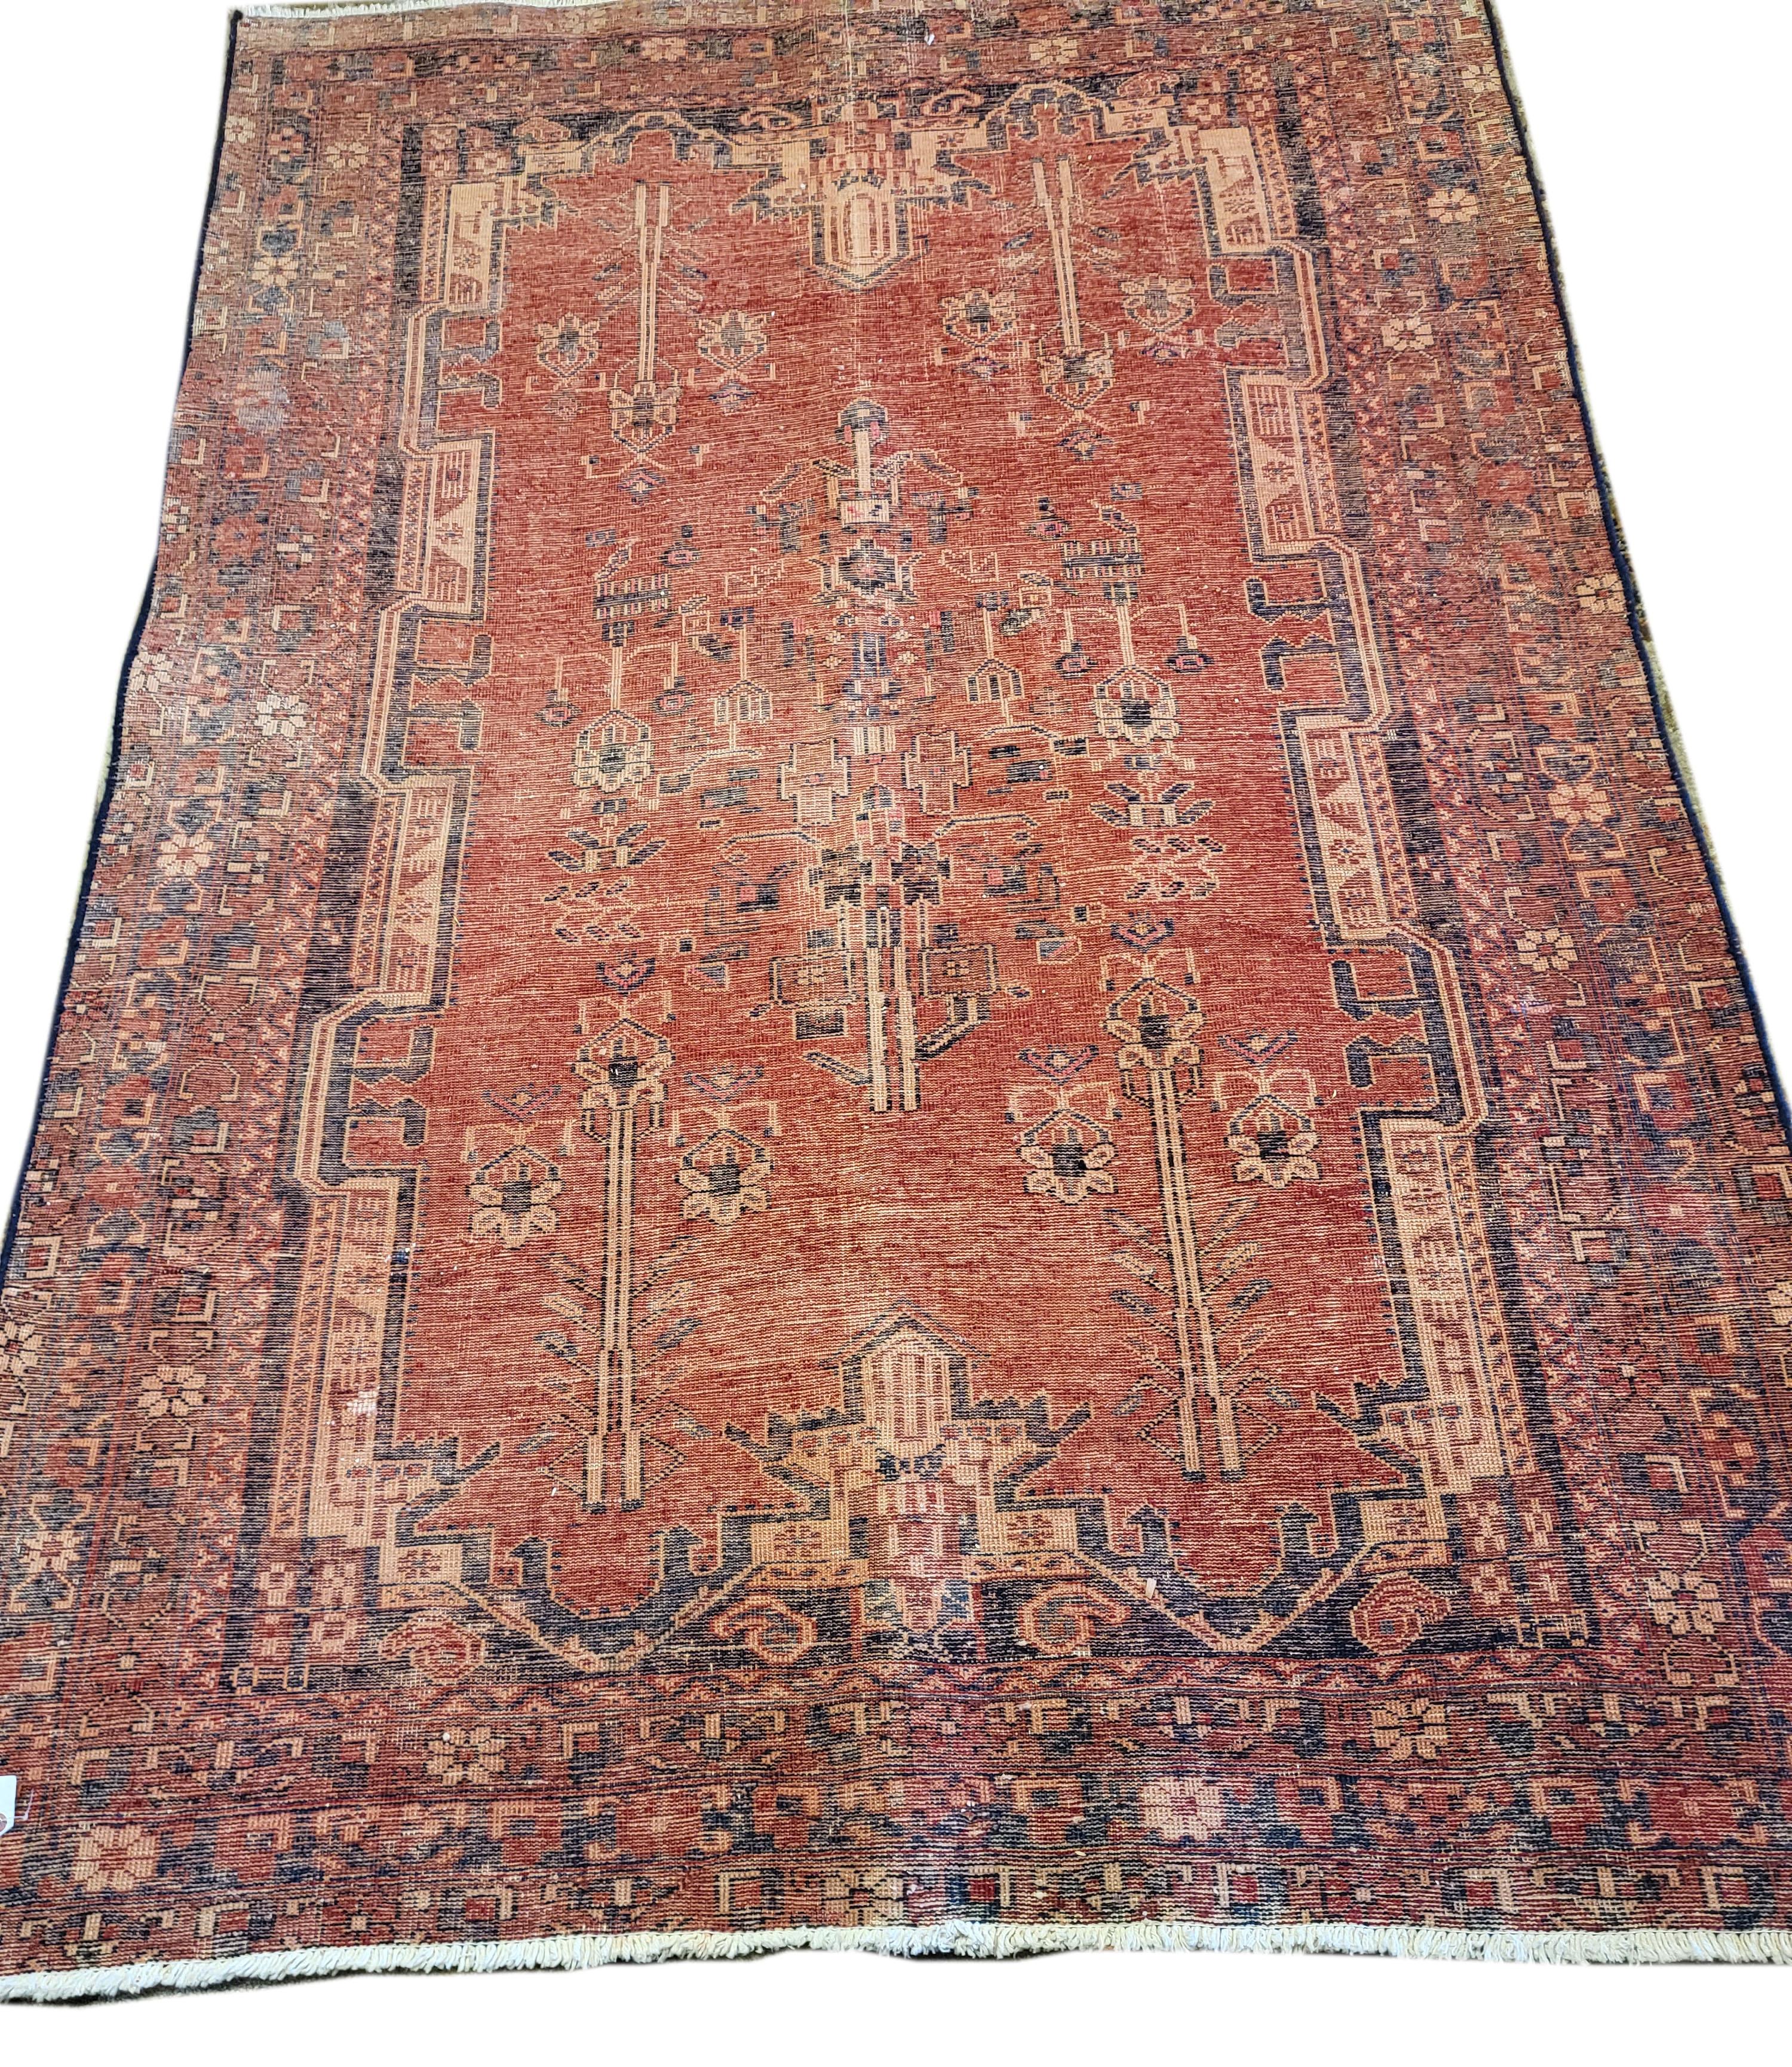 This 1950's Sirjan is incredibly exceptional. This piece is in amazing condition for the age and will look good for another 100 years to come. The rich, rusty tones are enhanced with beautifully intricate borders. The quality of the wool and